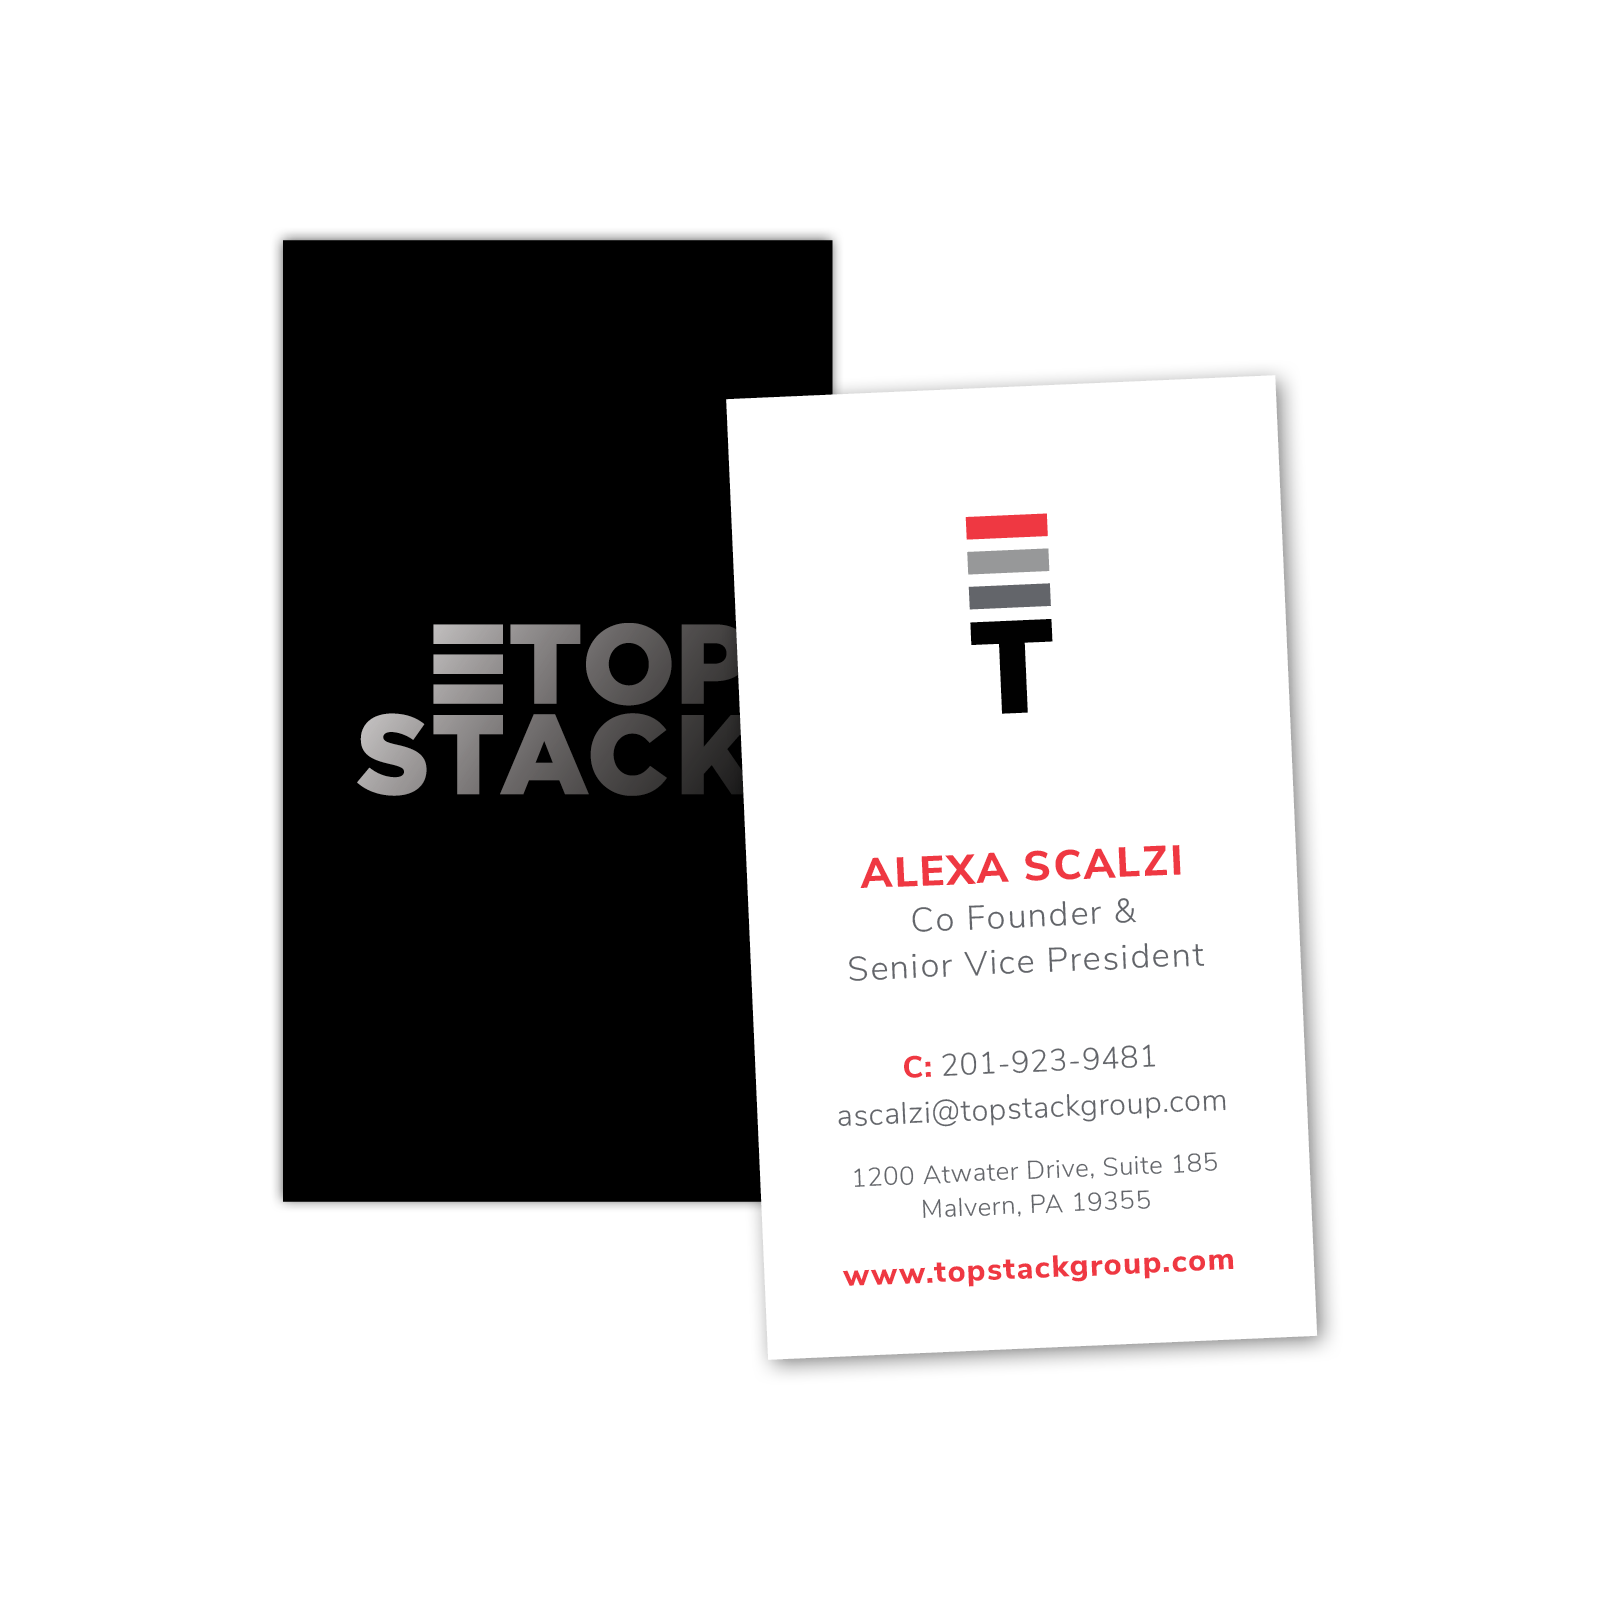 Top Stack Business Card